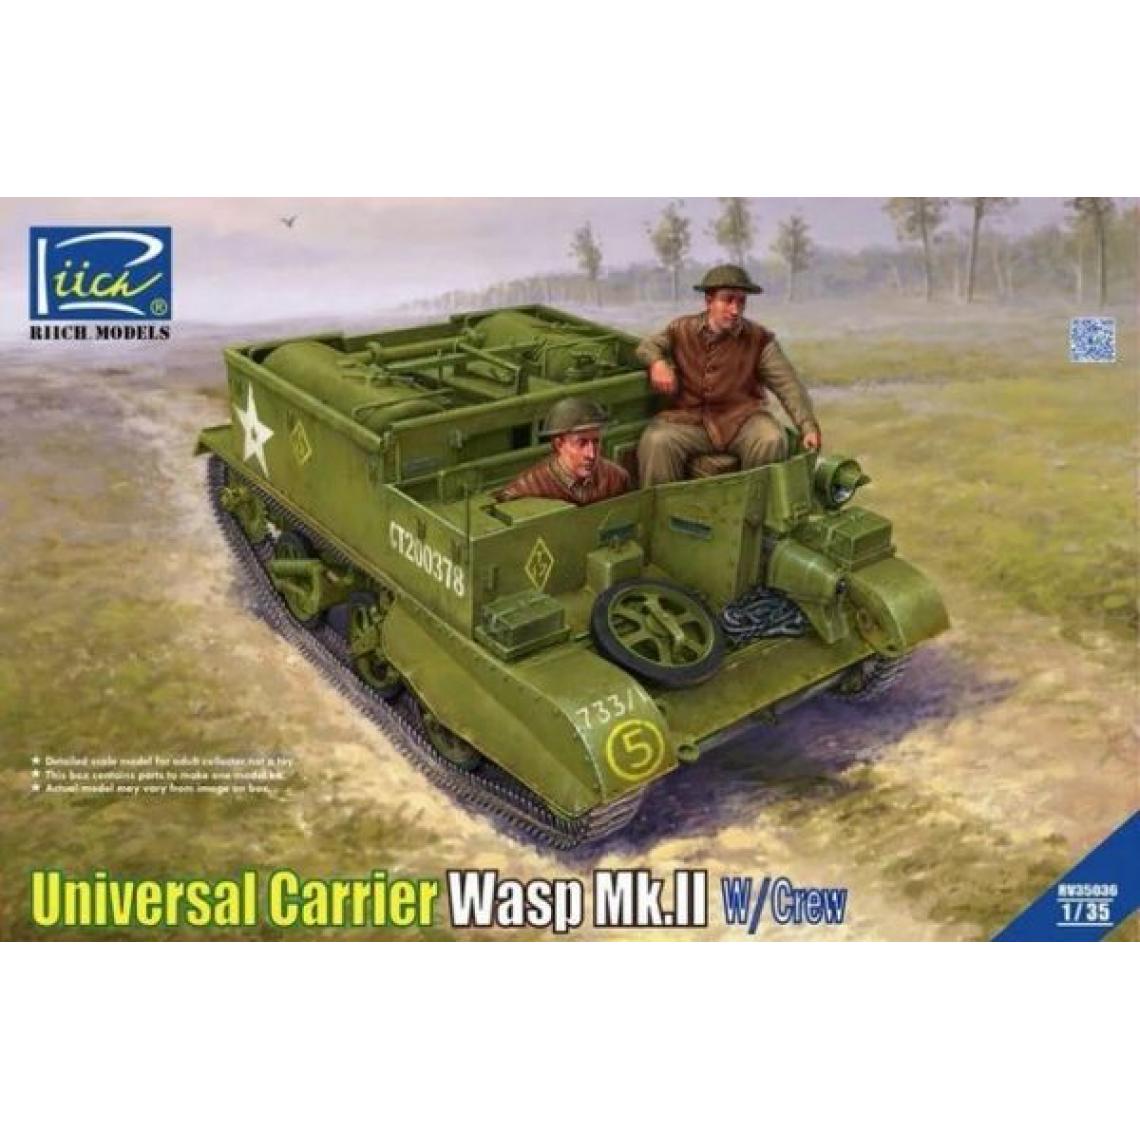 Riich Models - Universal Carrier Wasp Mk.IIC w/Crew are included in the first batch of produ- 1:35e - Riich Models - Accessoires et pièces